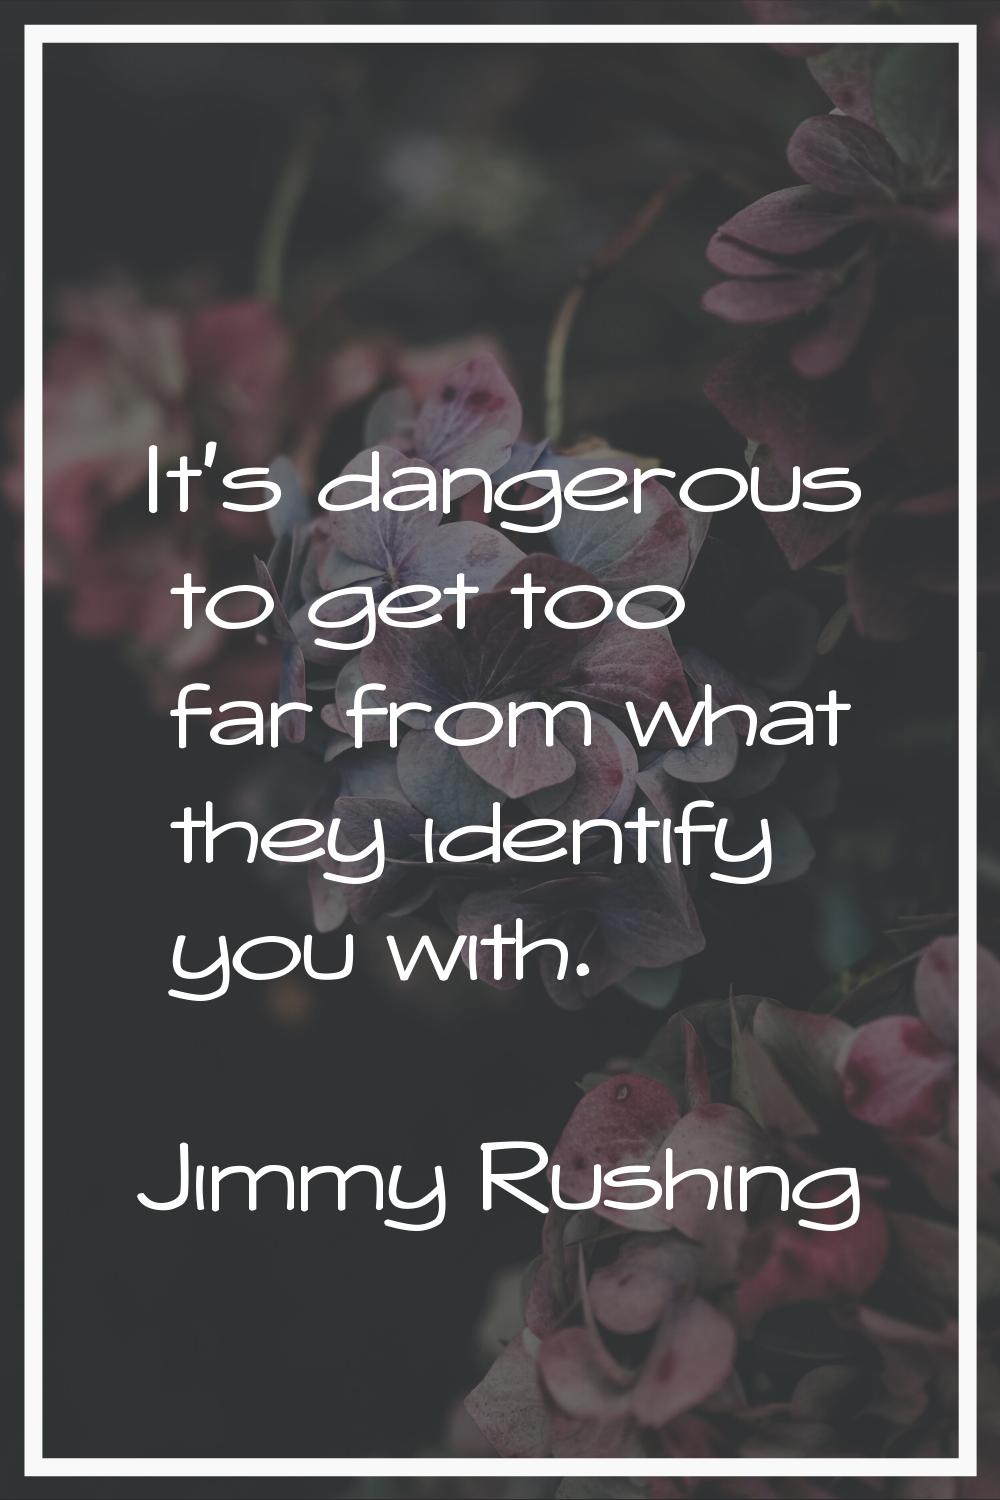 It's dangerous to get too far from what they identify you with.